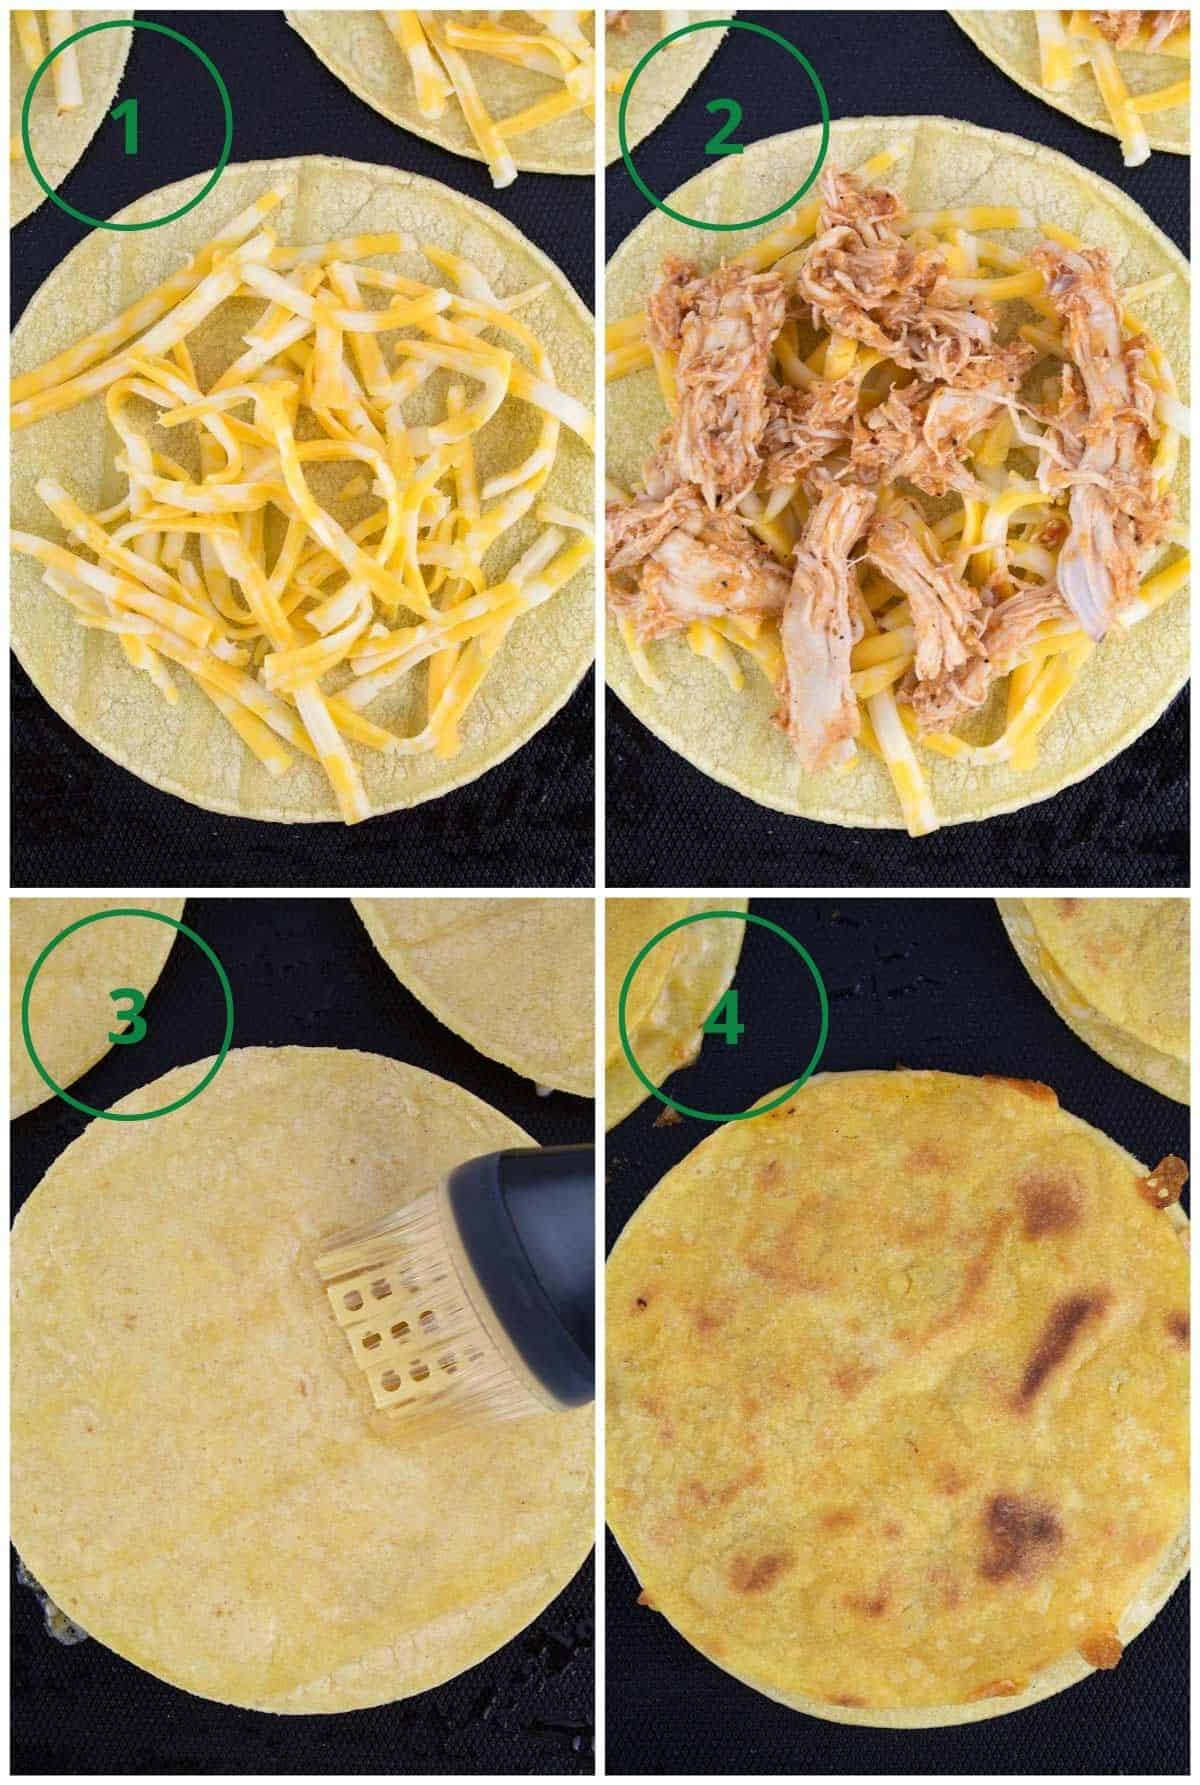 Step-by-step instructions for assembling corn tortilla quesadillas with cheese and leftover taco meat.